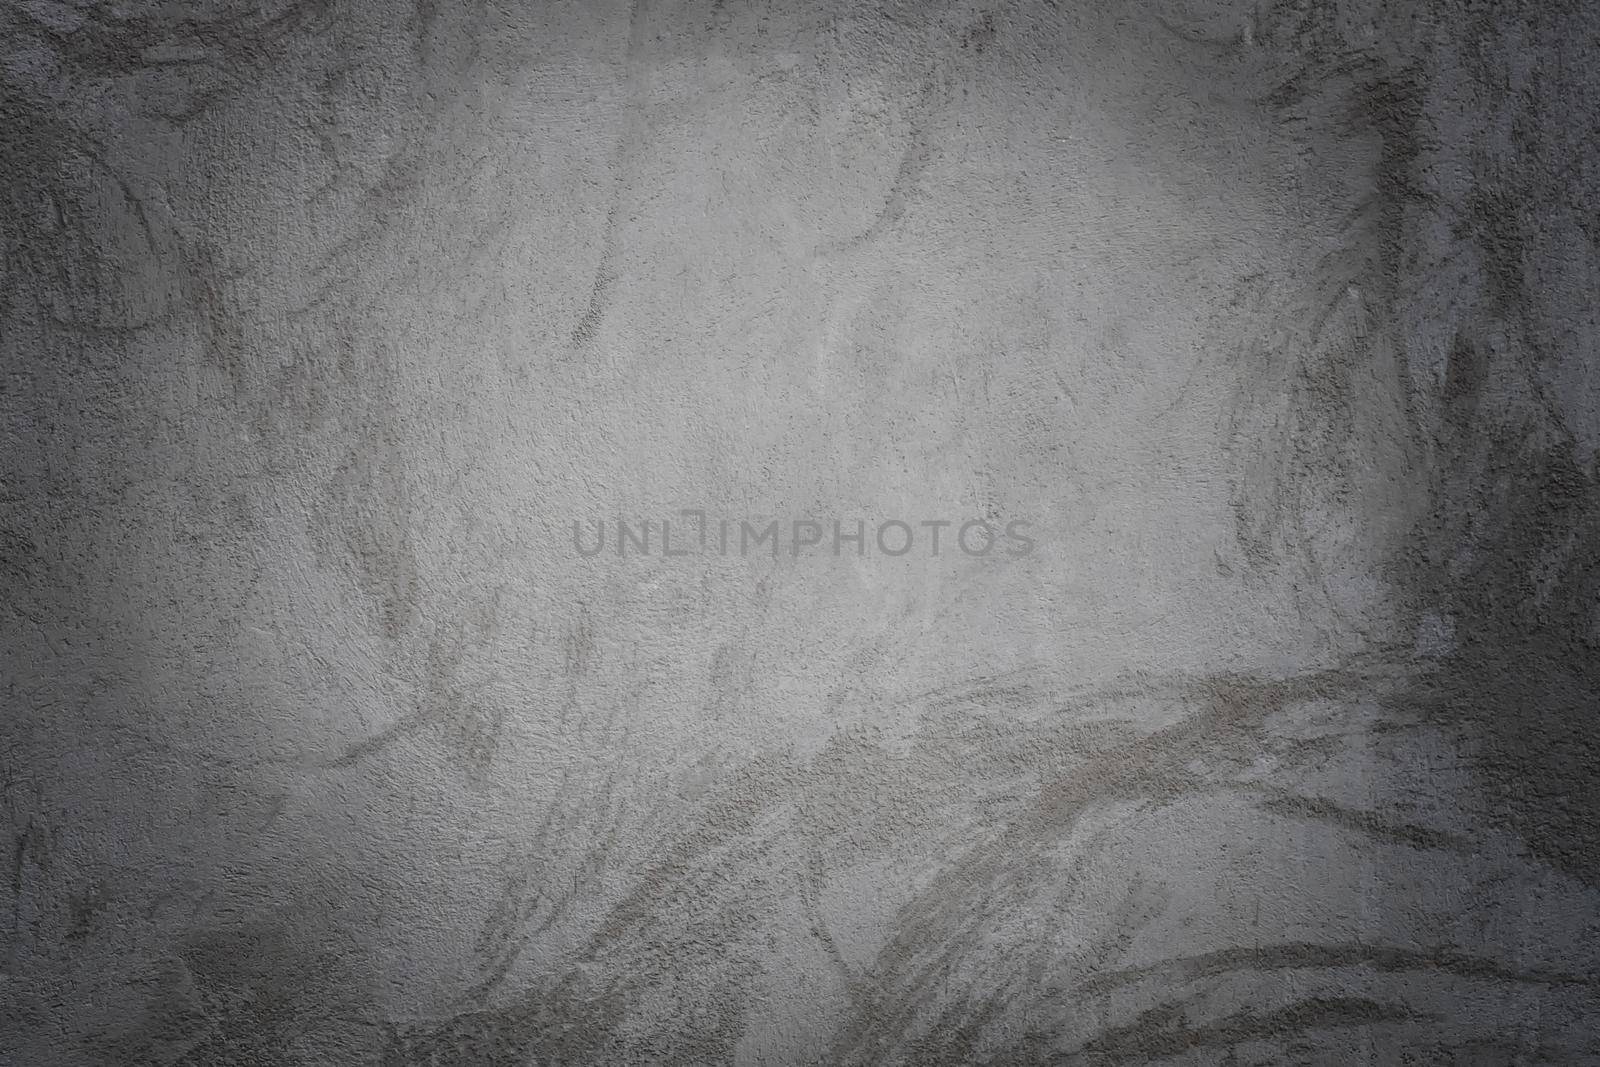 Concrete wall texture for background or product display montage.